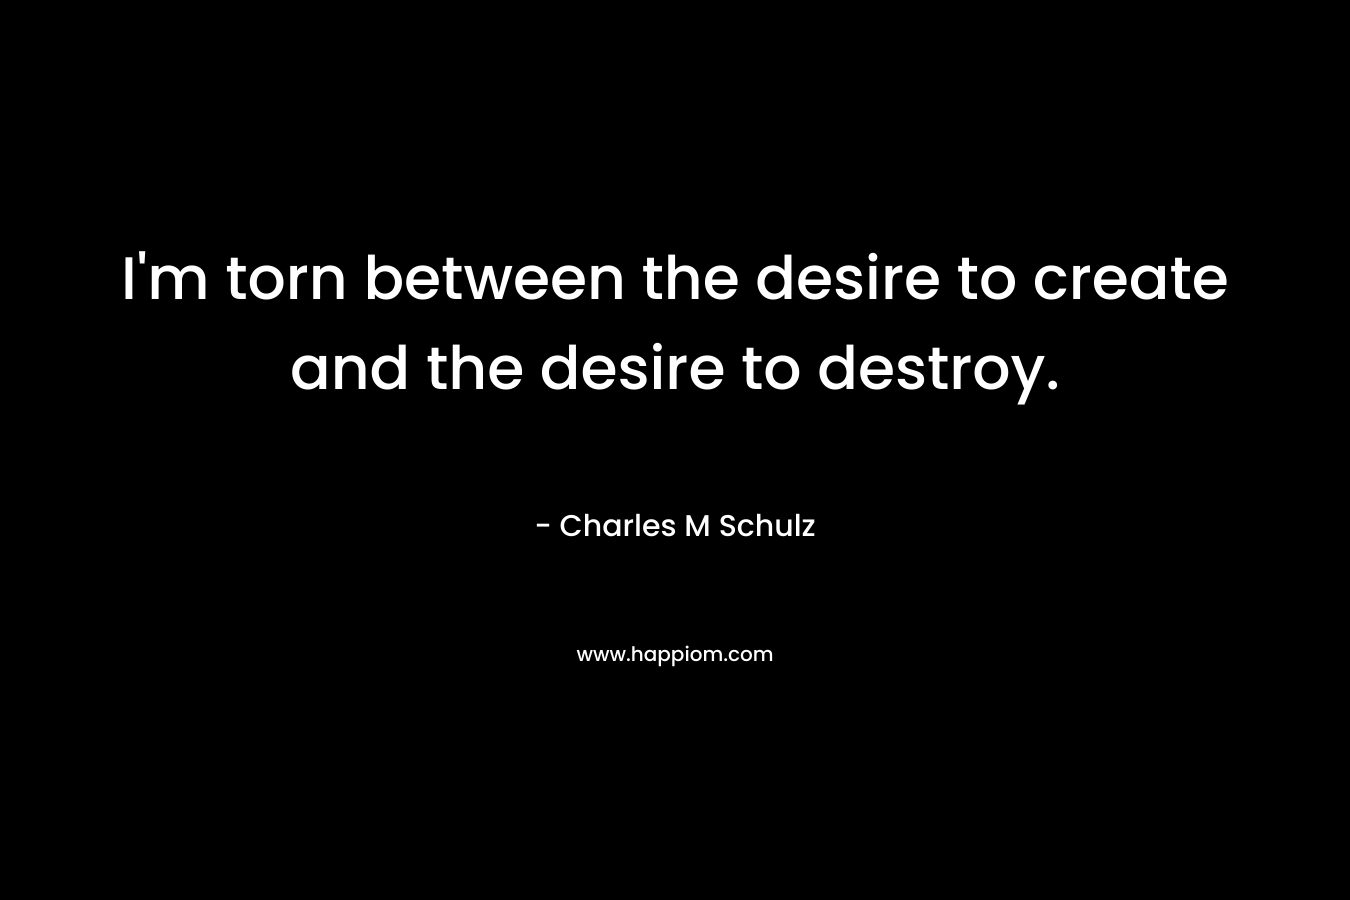 I'm torn between the desire to create and the desire to destroy.